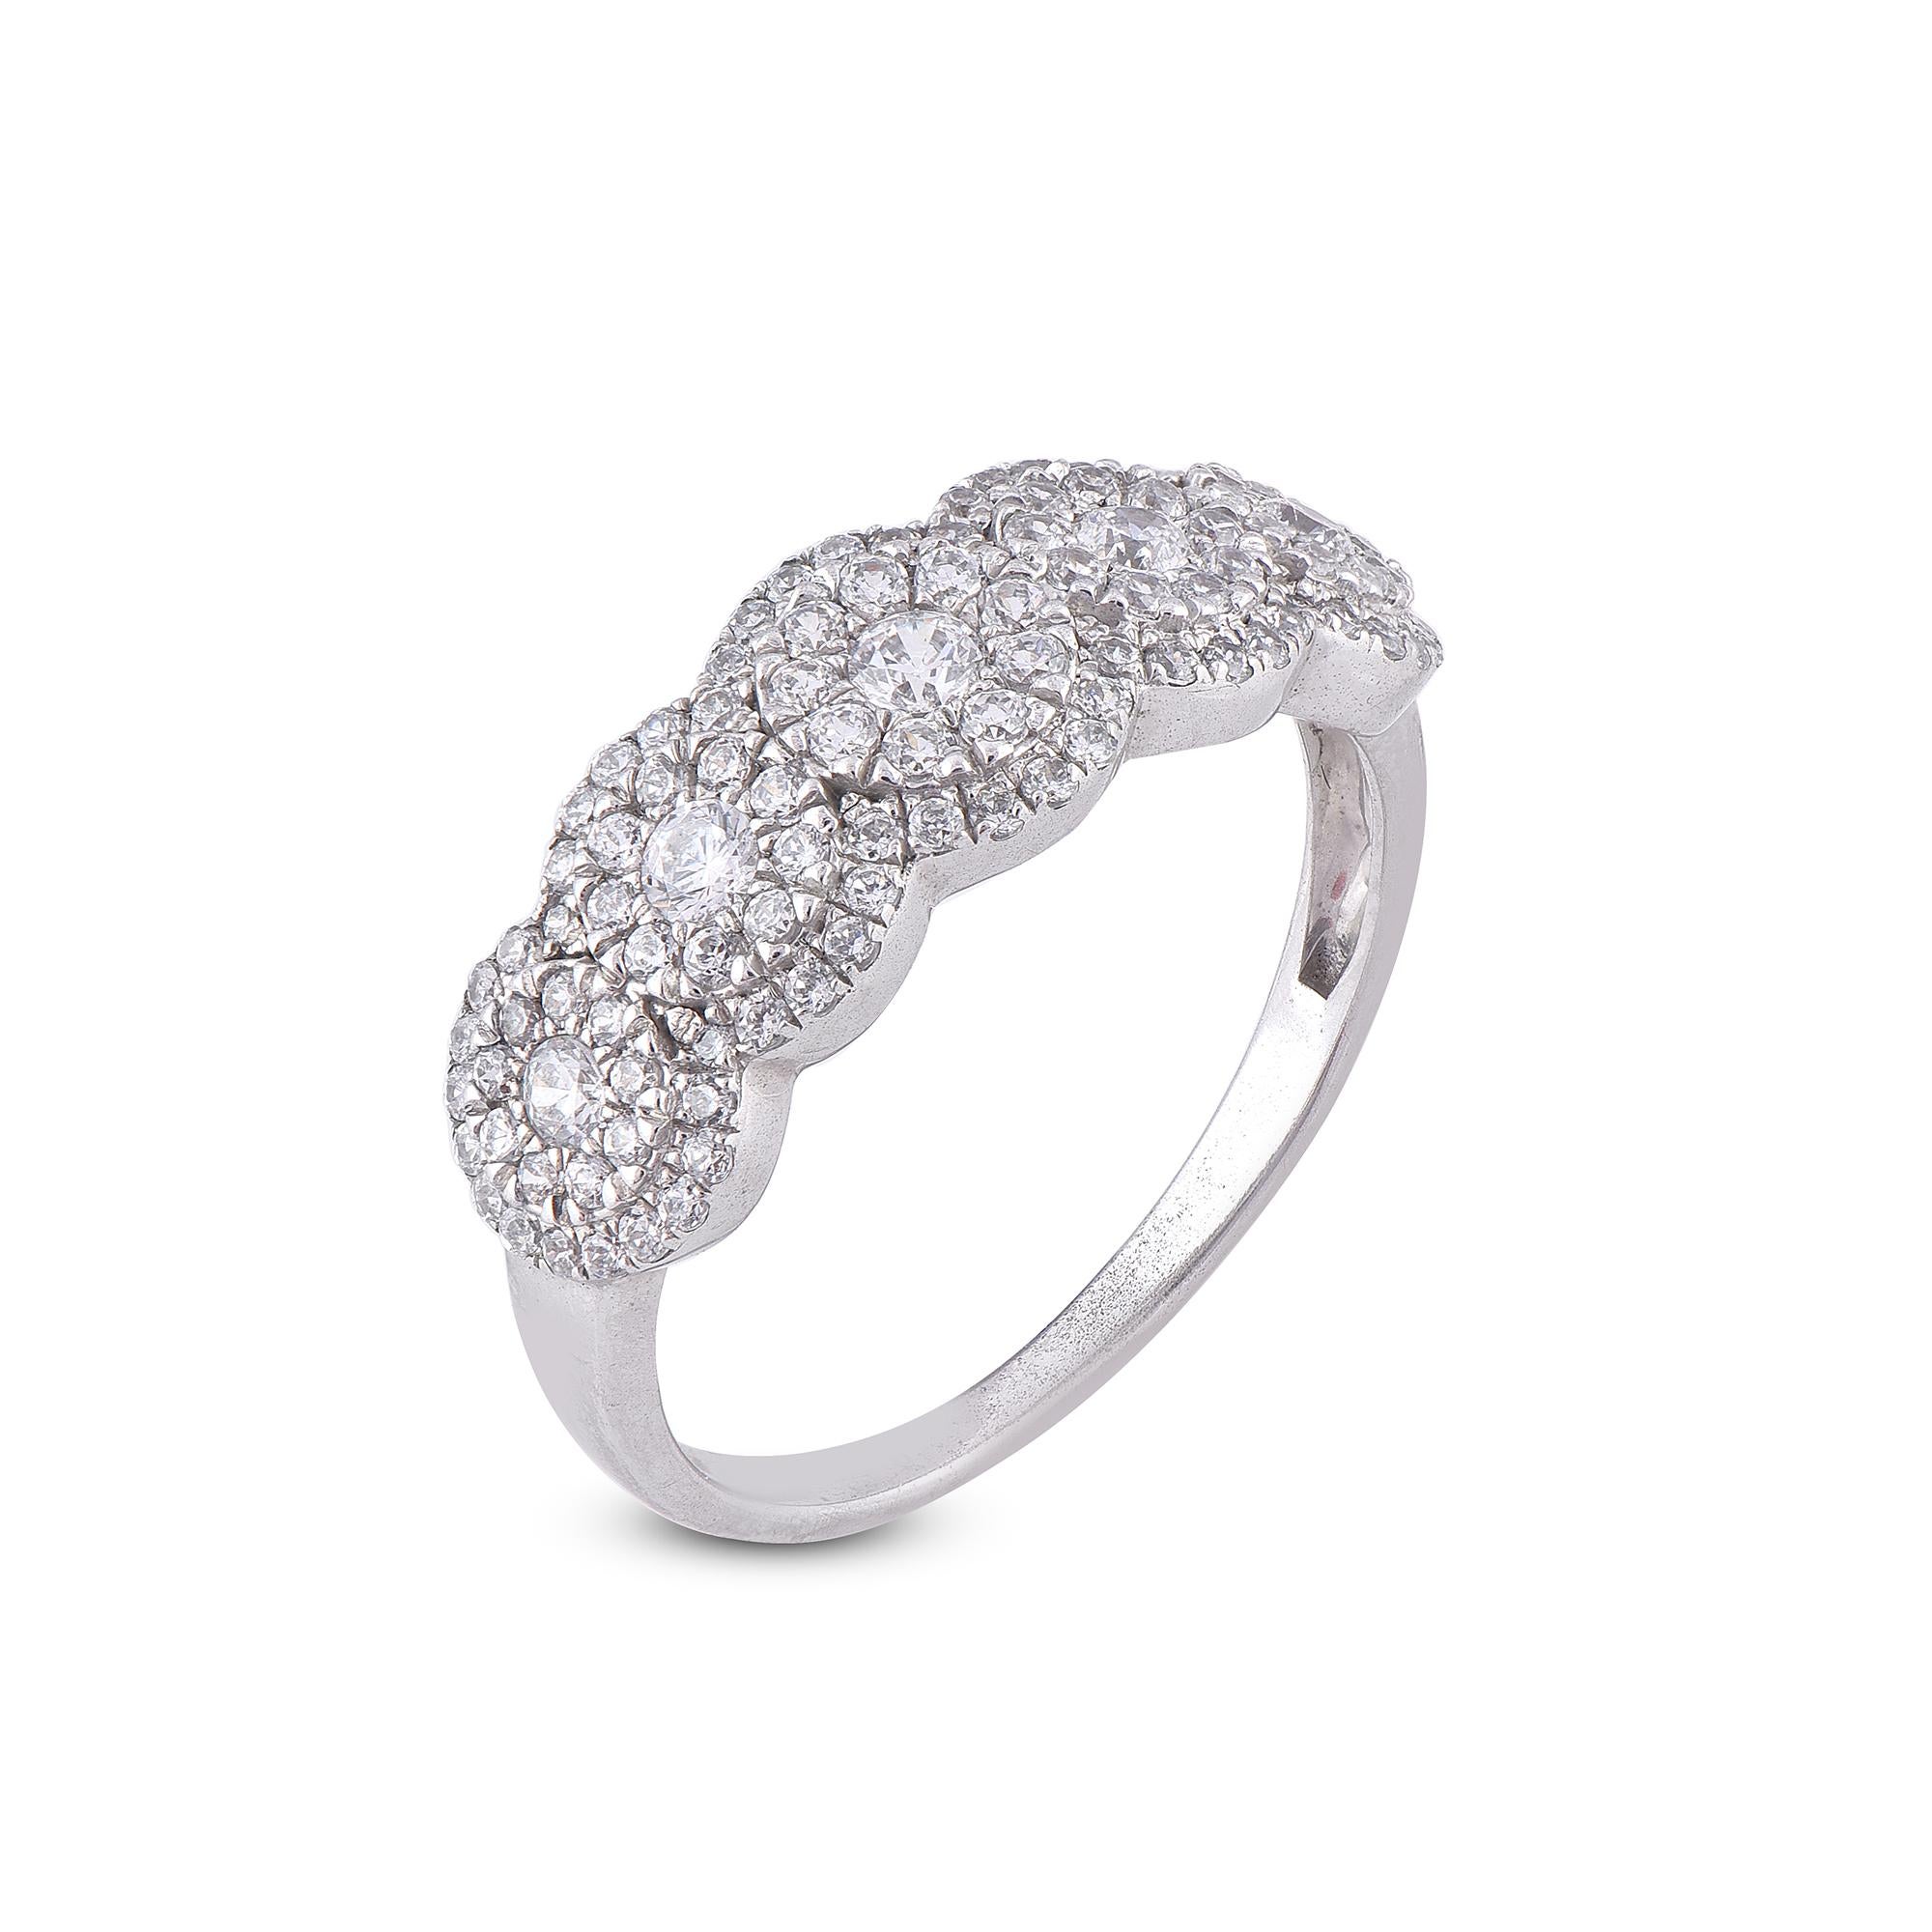 This ring shimmers beautifully with 110 round natural diamonds sets in prong setting. This cluster design ring fashioned in solid 14 kt white gold and H-I color I2 clarity
